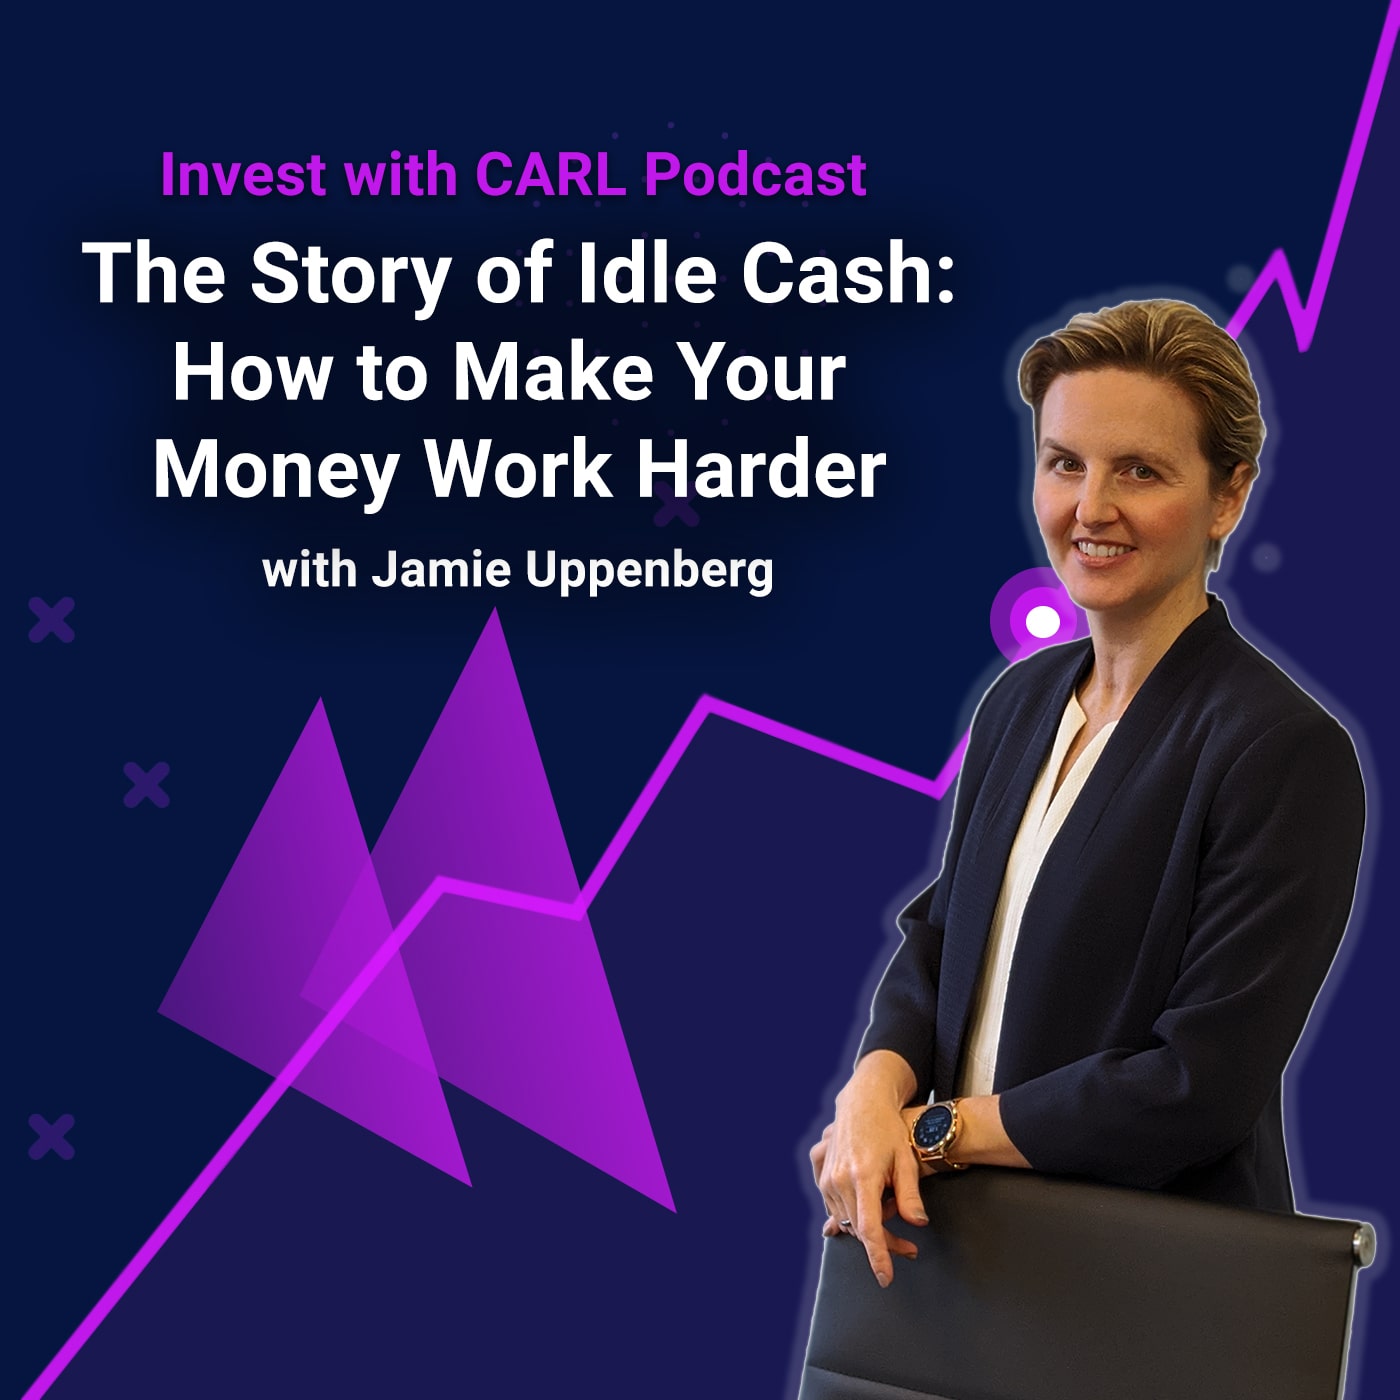 The Story of Idle Cash: How to Make Your Money Work Harder